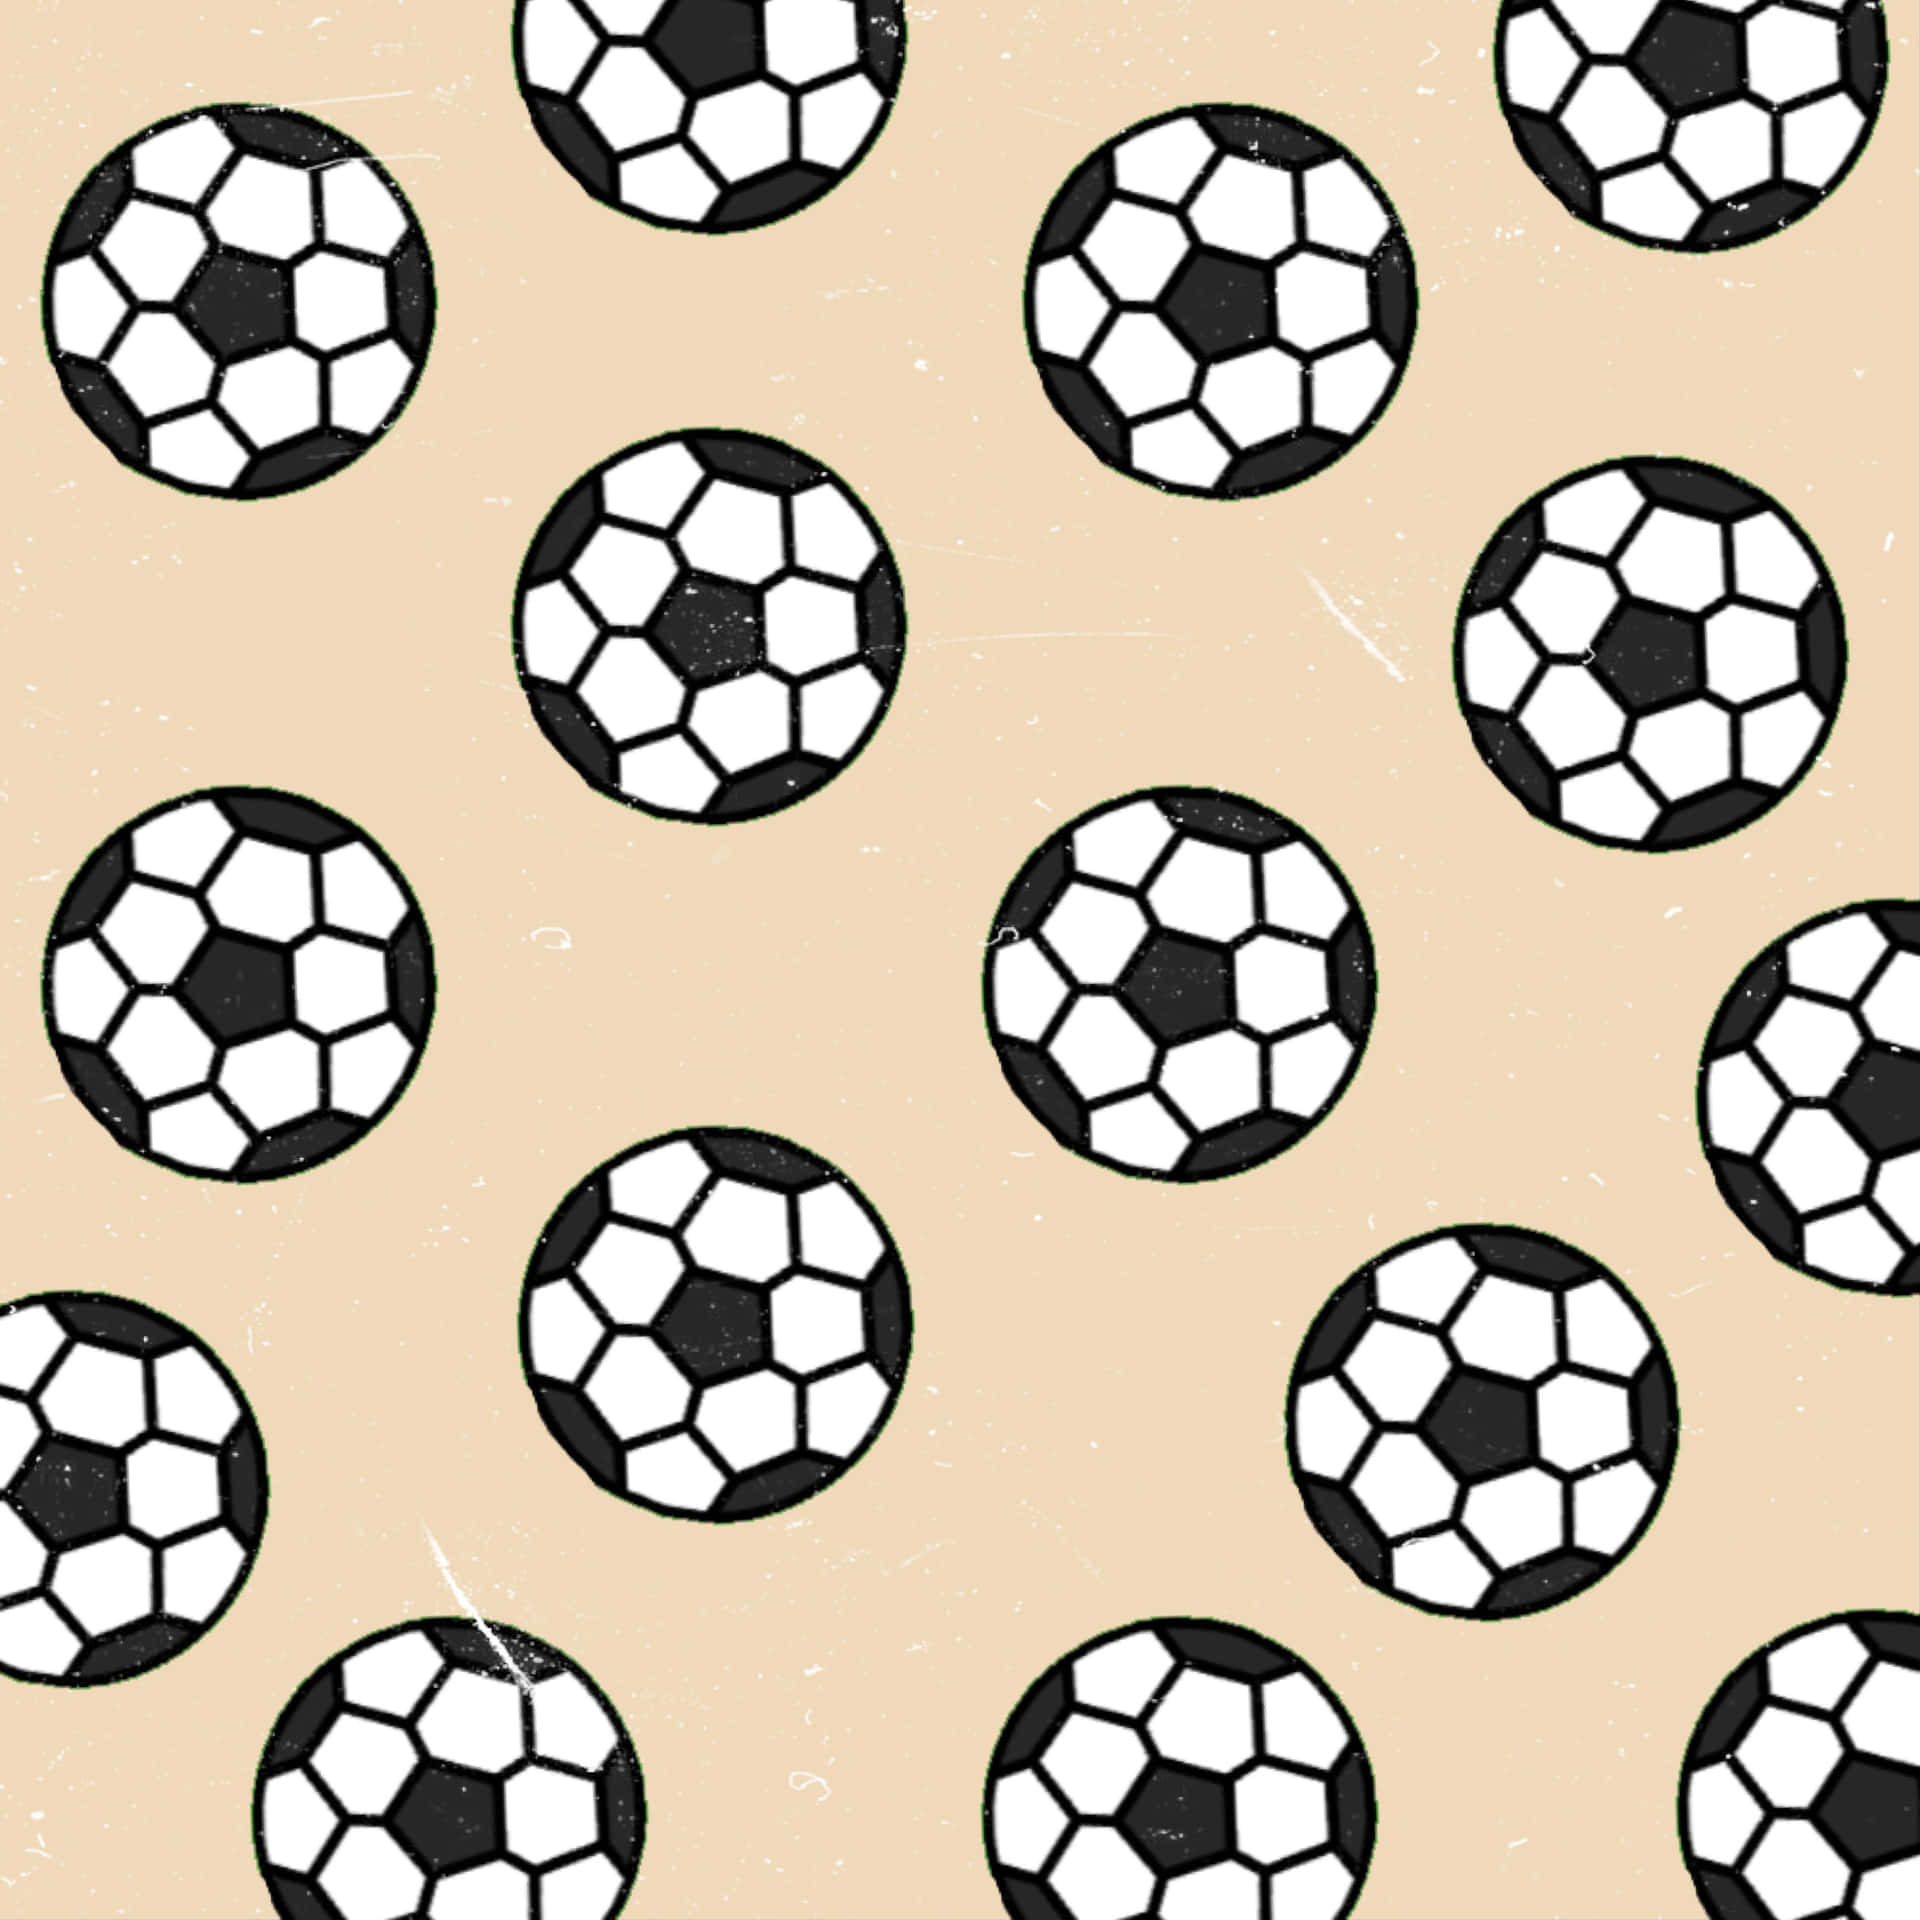 When emotion and beauty combine, soccer is an aesthetic like no other. Wallpaper